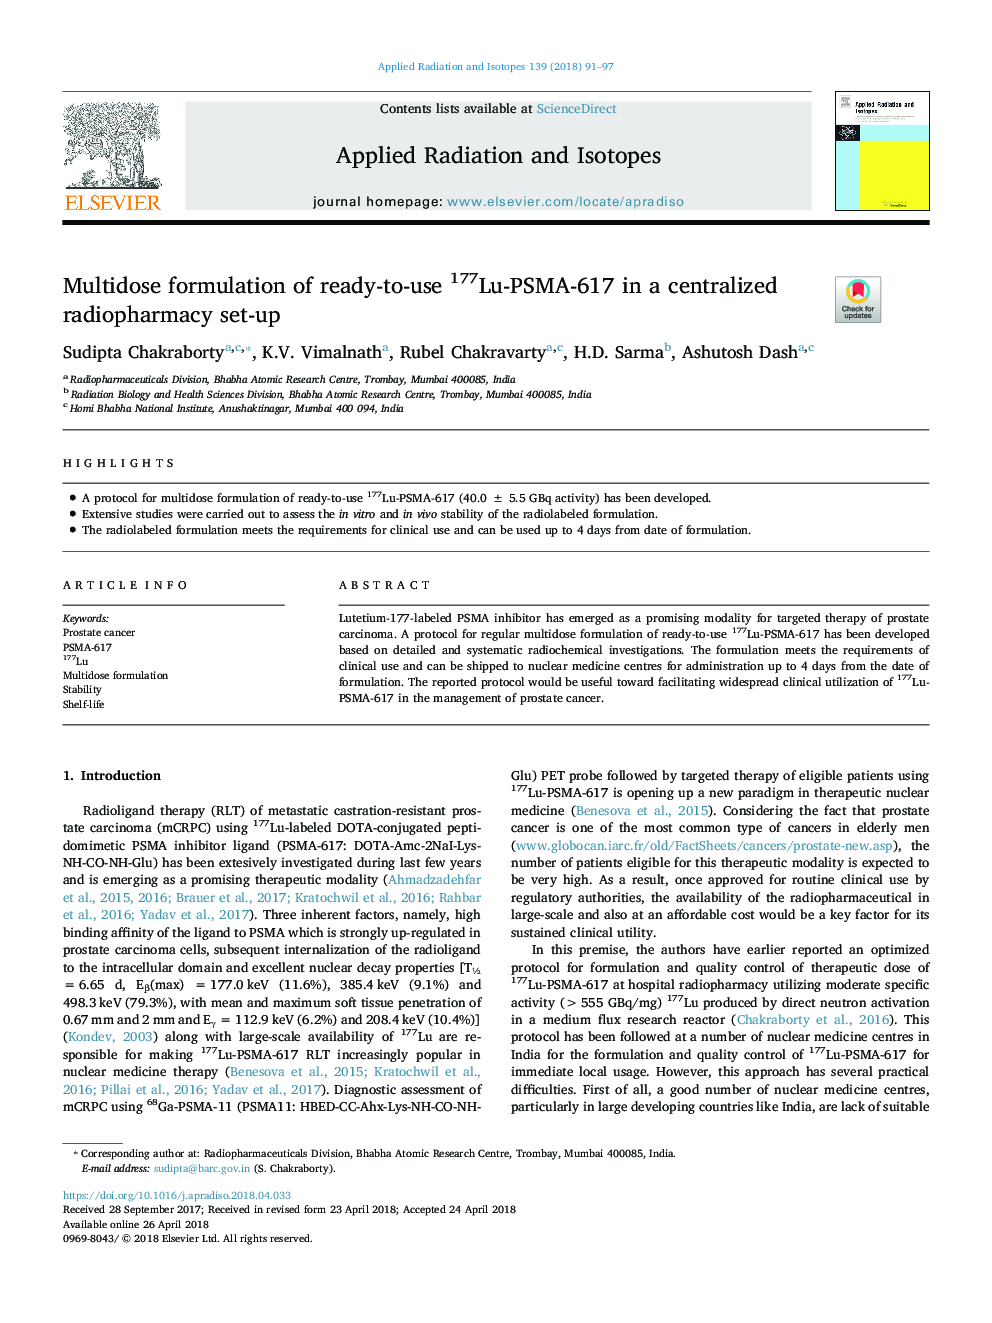 Multidose formulation of ready-to-use 177Lu-PSMA-617 in a centralized radiopharmacy set-up